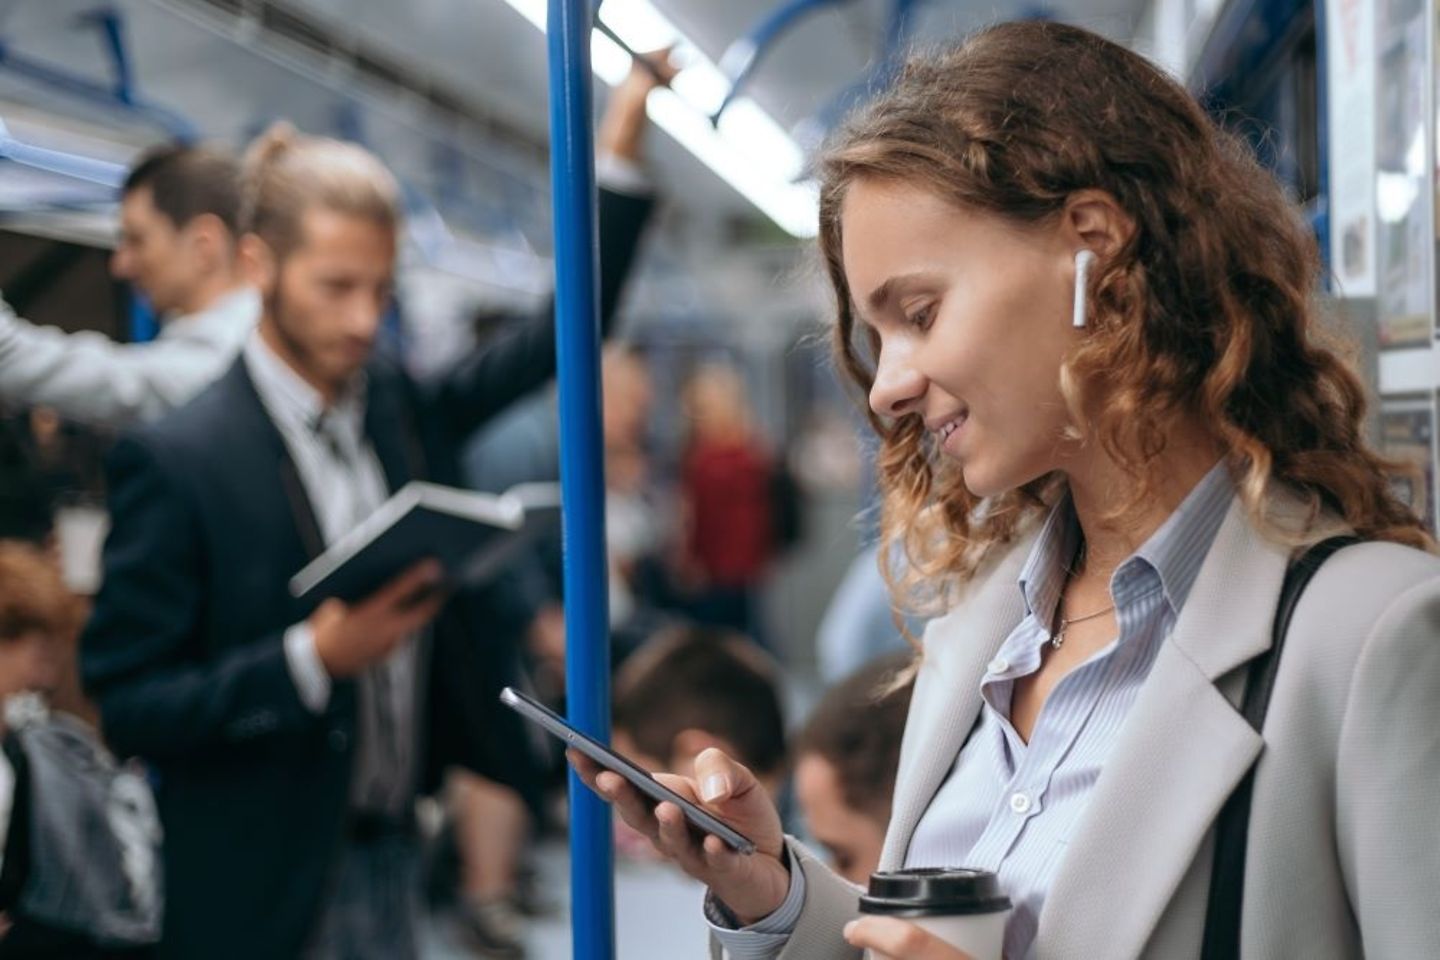 Businesswoman taking the tube train to her office reads smartphone